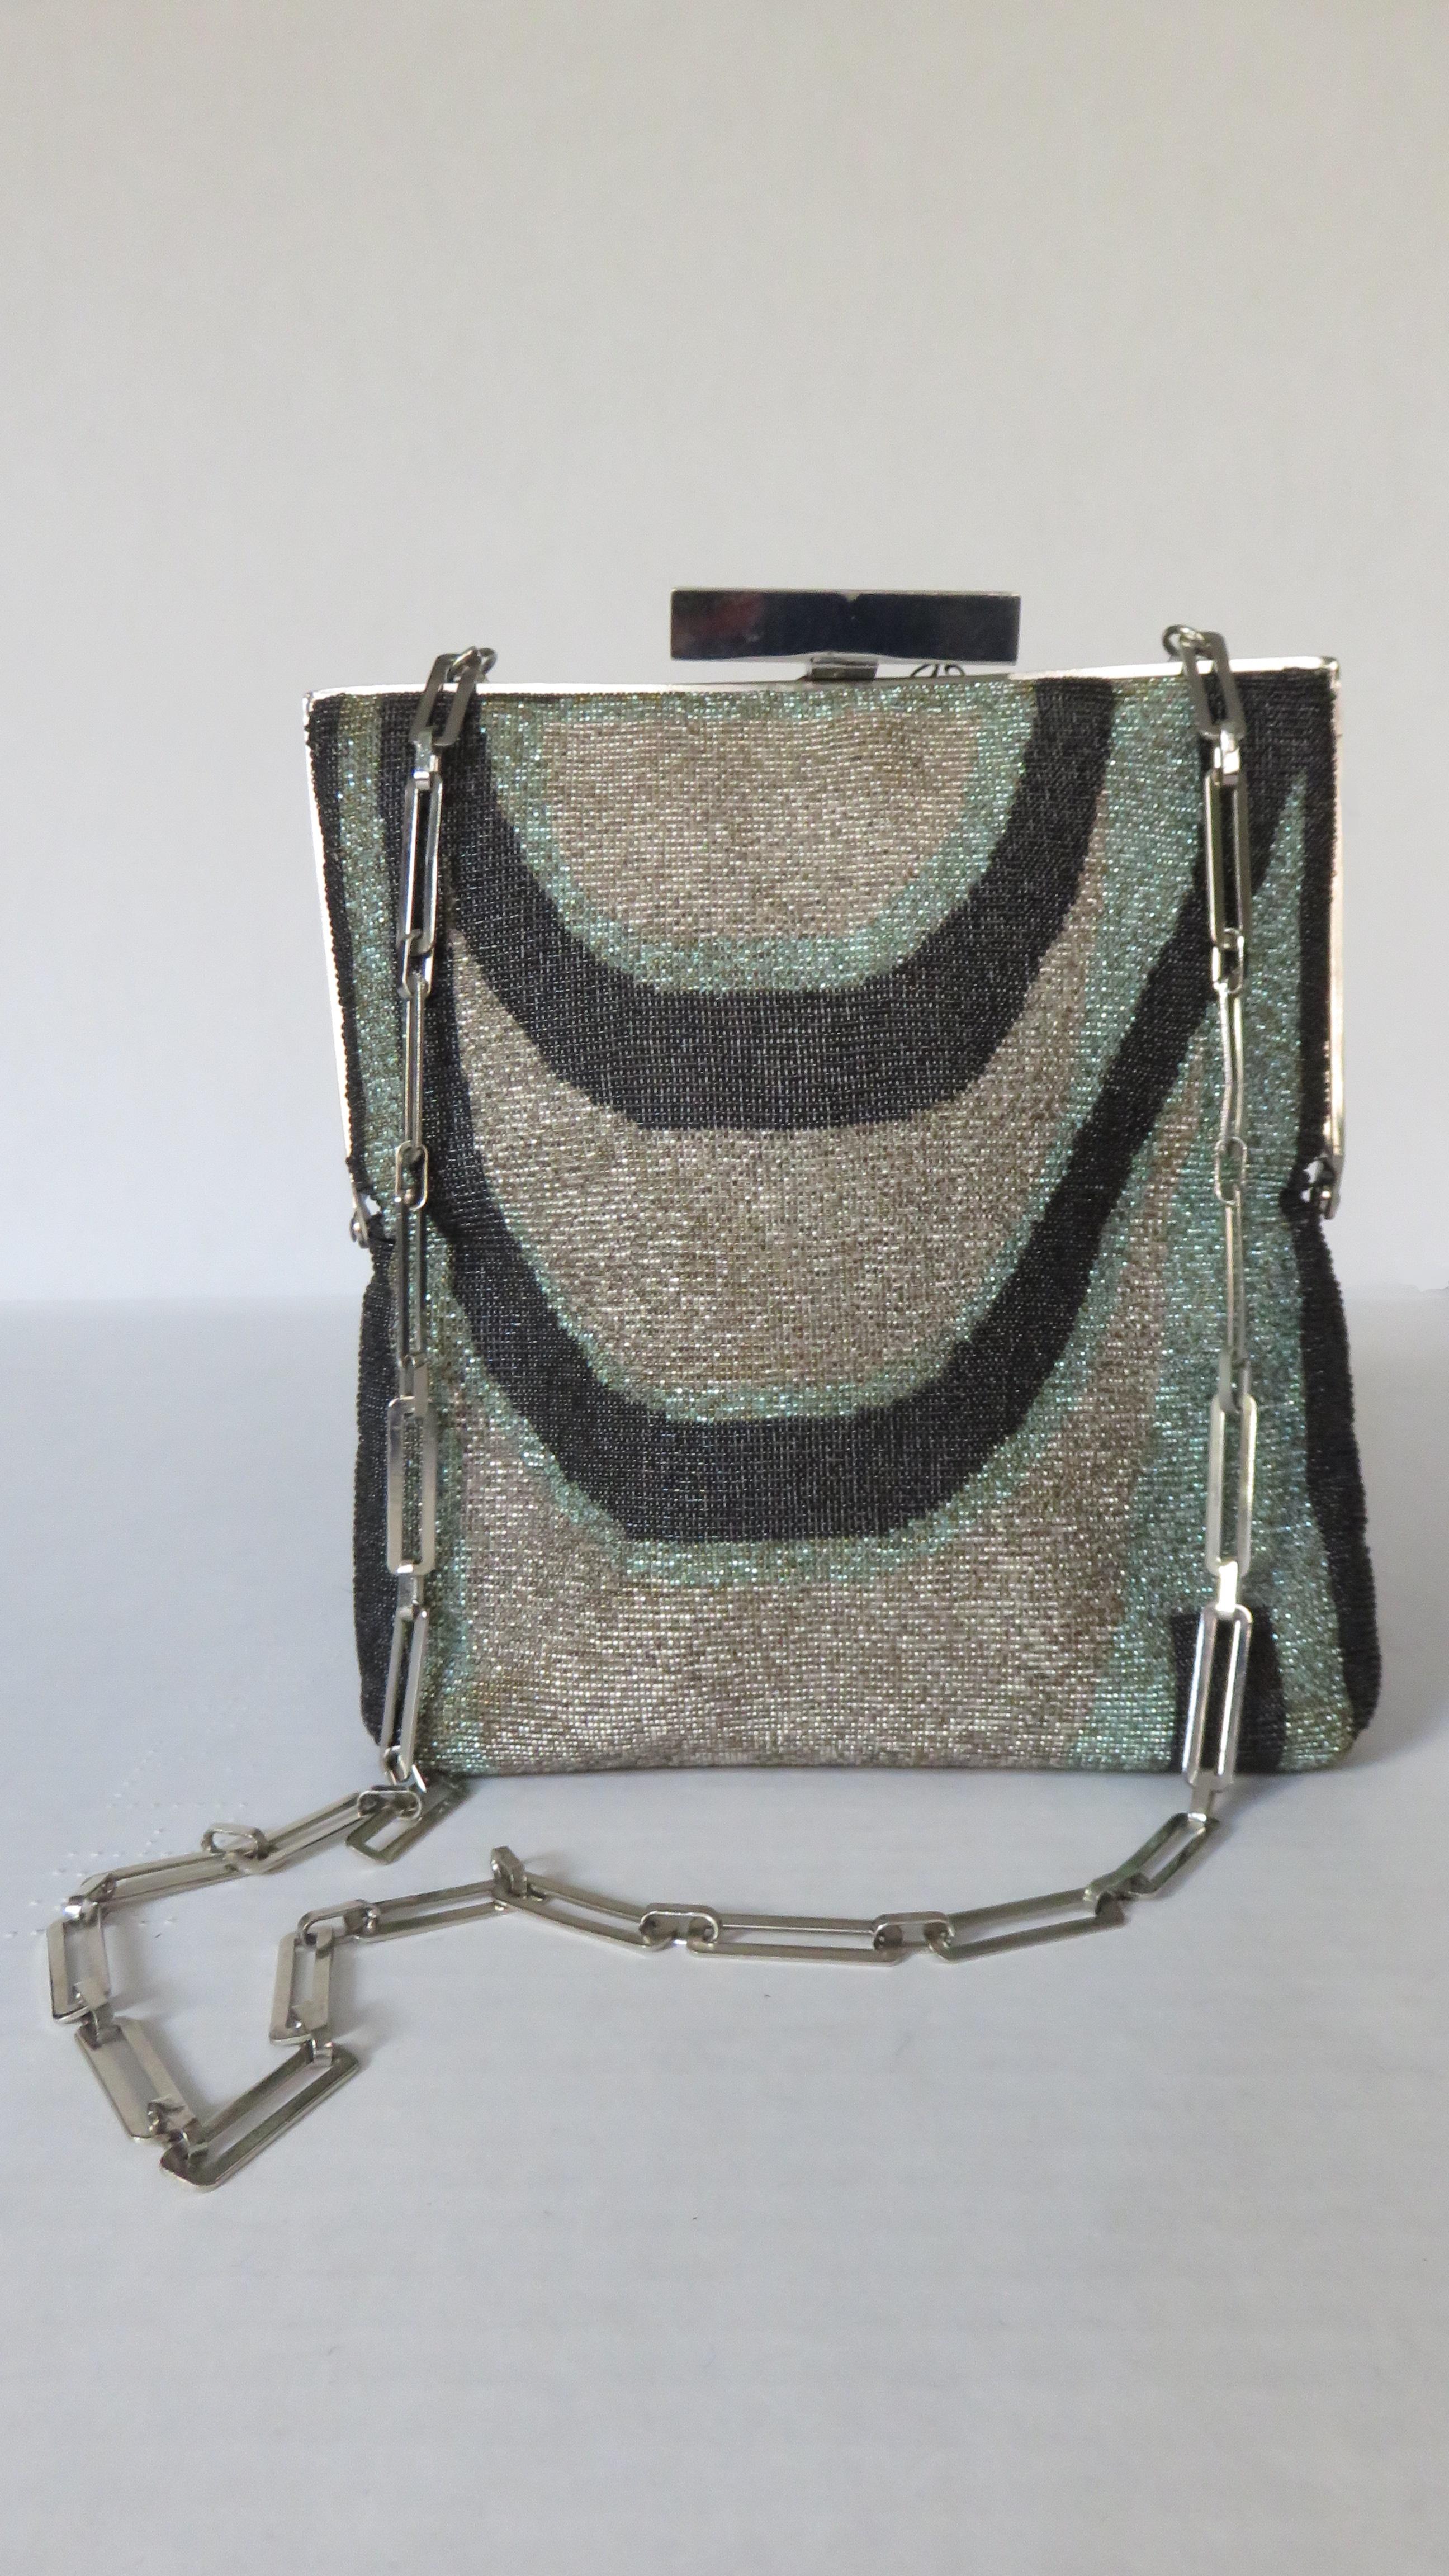 A fabulous Pierre Cardin shoulder bag in black, silver and mint green micro beading.  It has a silver rectangular link chain strap, frame, and rectangular PC engraved top clasp closure.  Each side has a unique abstract pattern.  It is lined in off